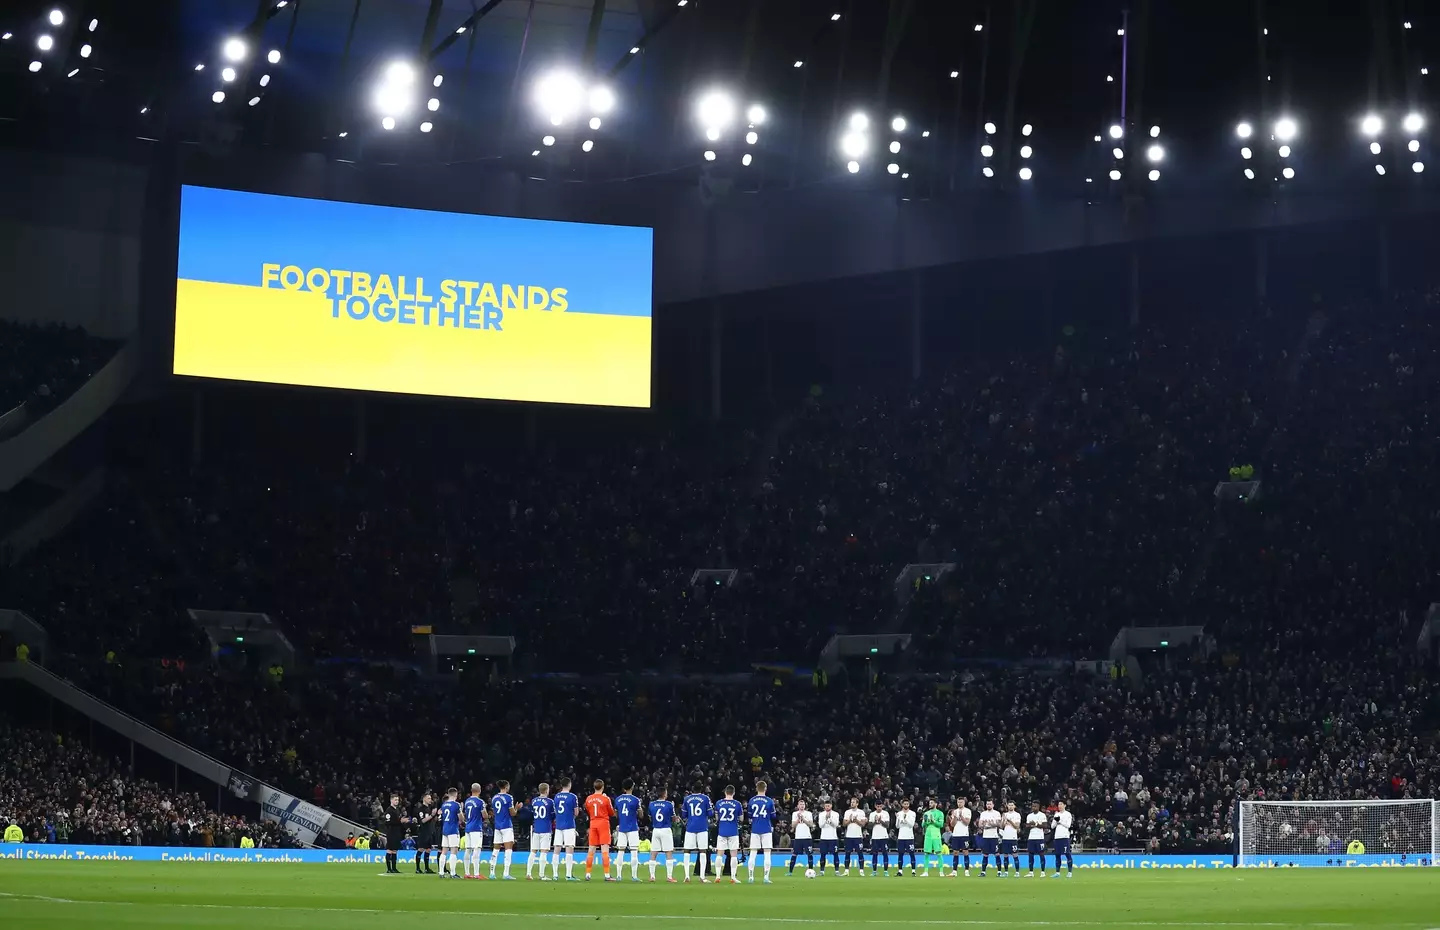 The 'Football Stands Together' sign displayed during Spurs win against Everton on Monday. Image: PA Images